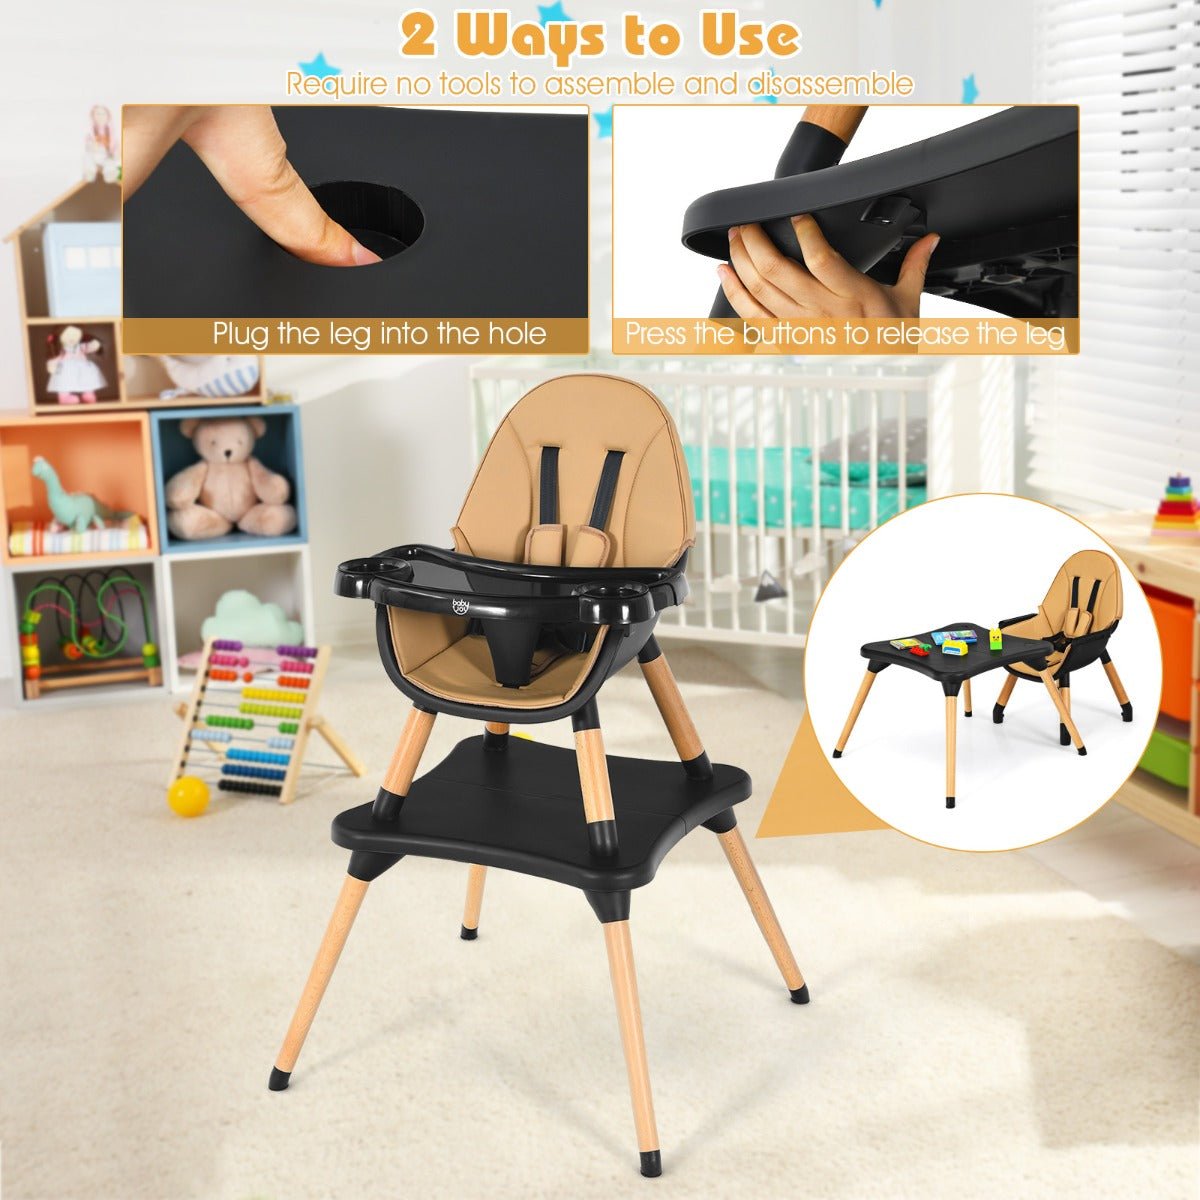 Coffee 5-in-1 High Chair - Convertible Wooden Seating for Toddlers